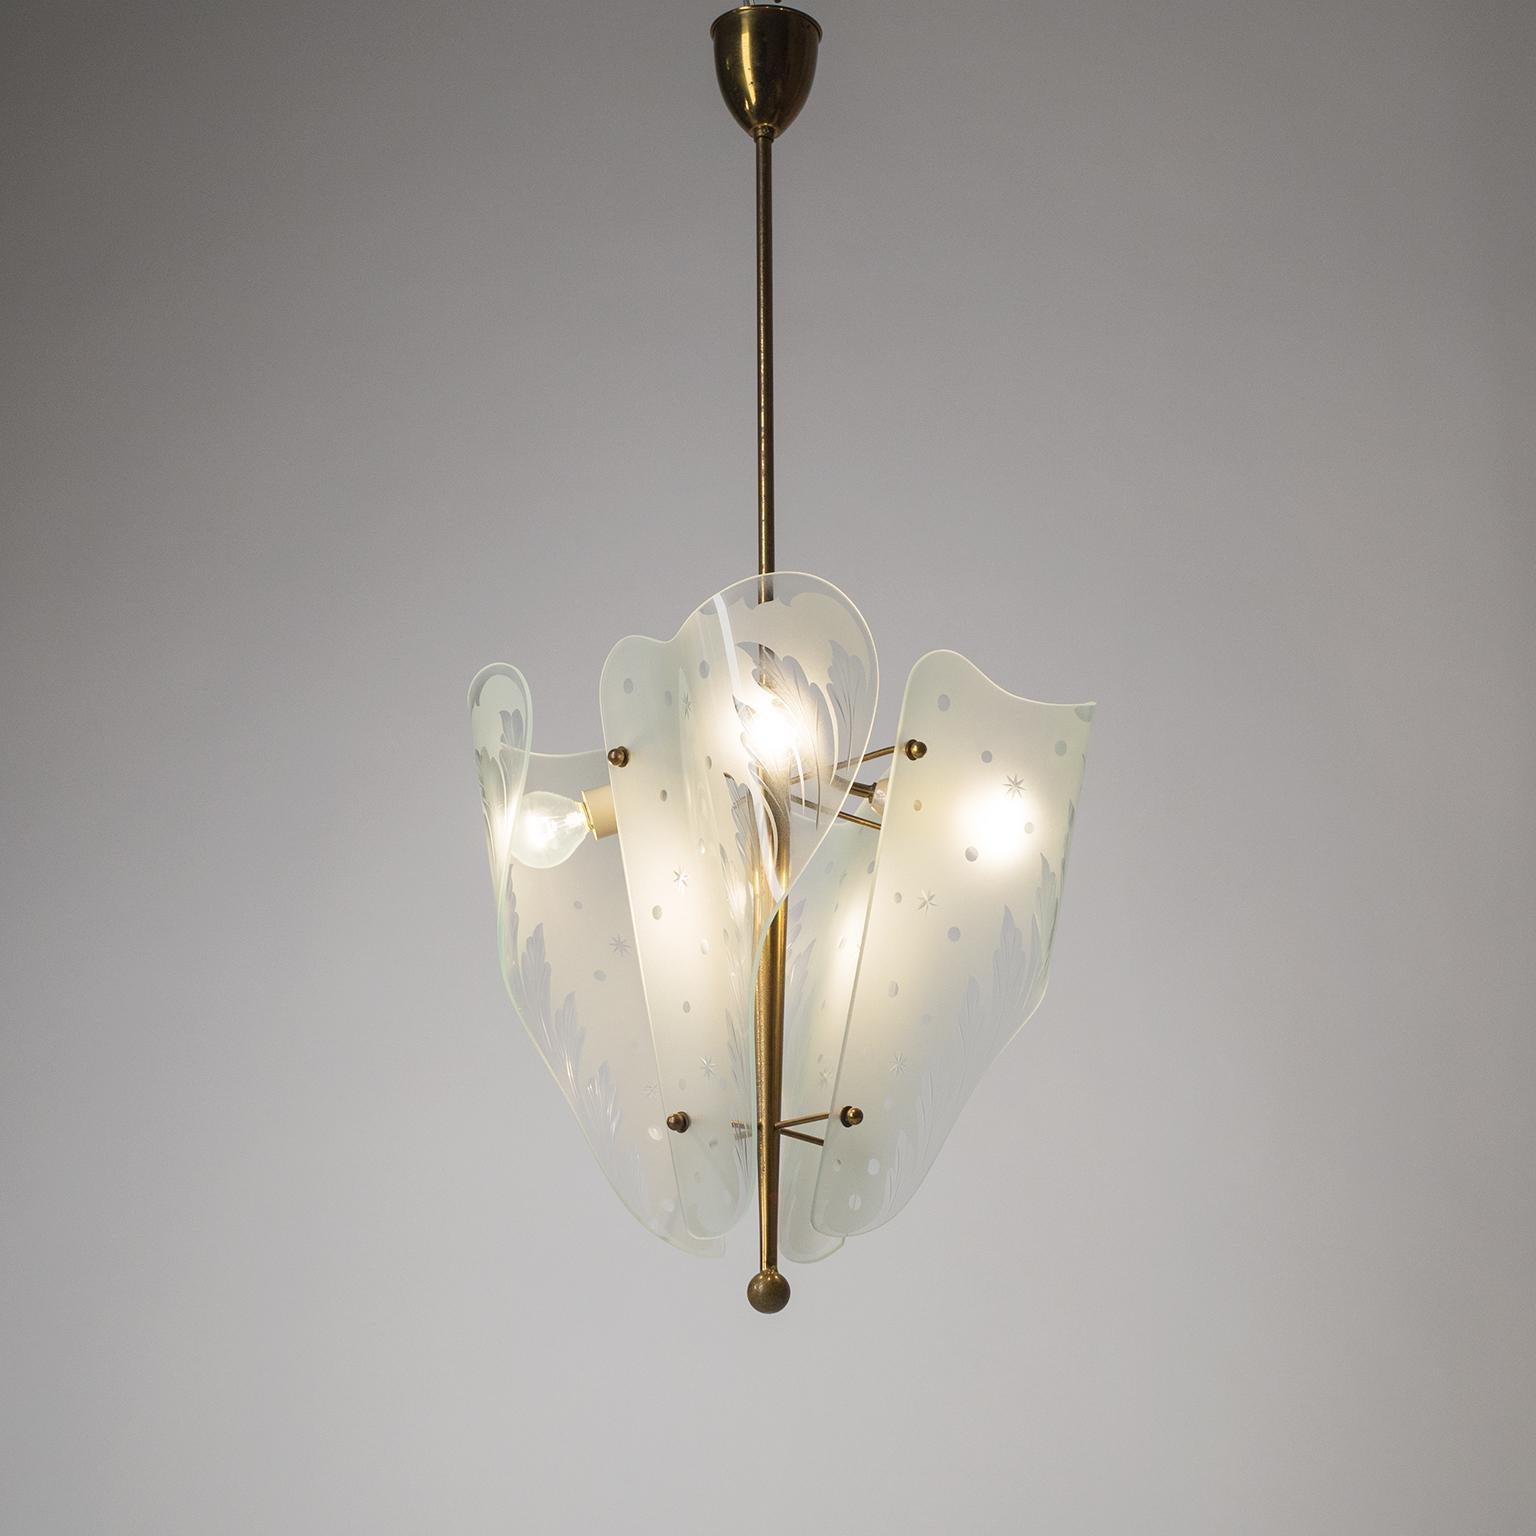 Rare midcentury Italian chandelier from the 1950s. Highly intricate glass work with four large organically shaped glass diffusers that are curved, acid-etched and cut with a decor of stars, dots and floral elements. Very nice original condition with